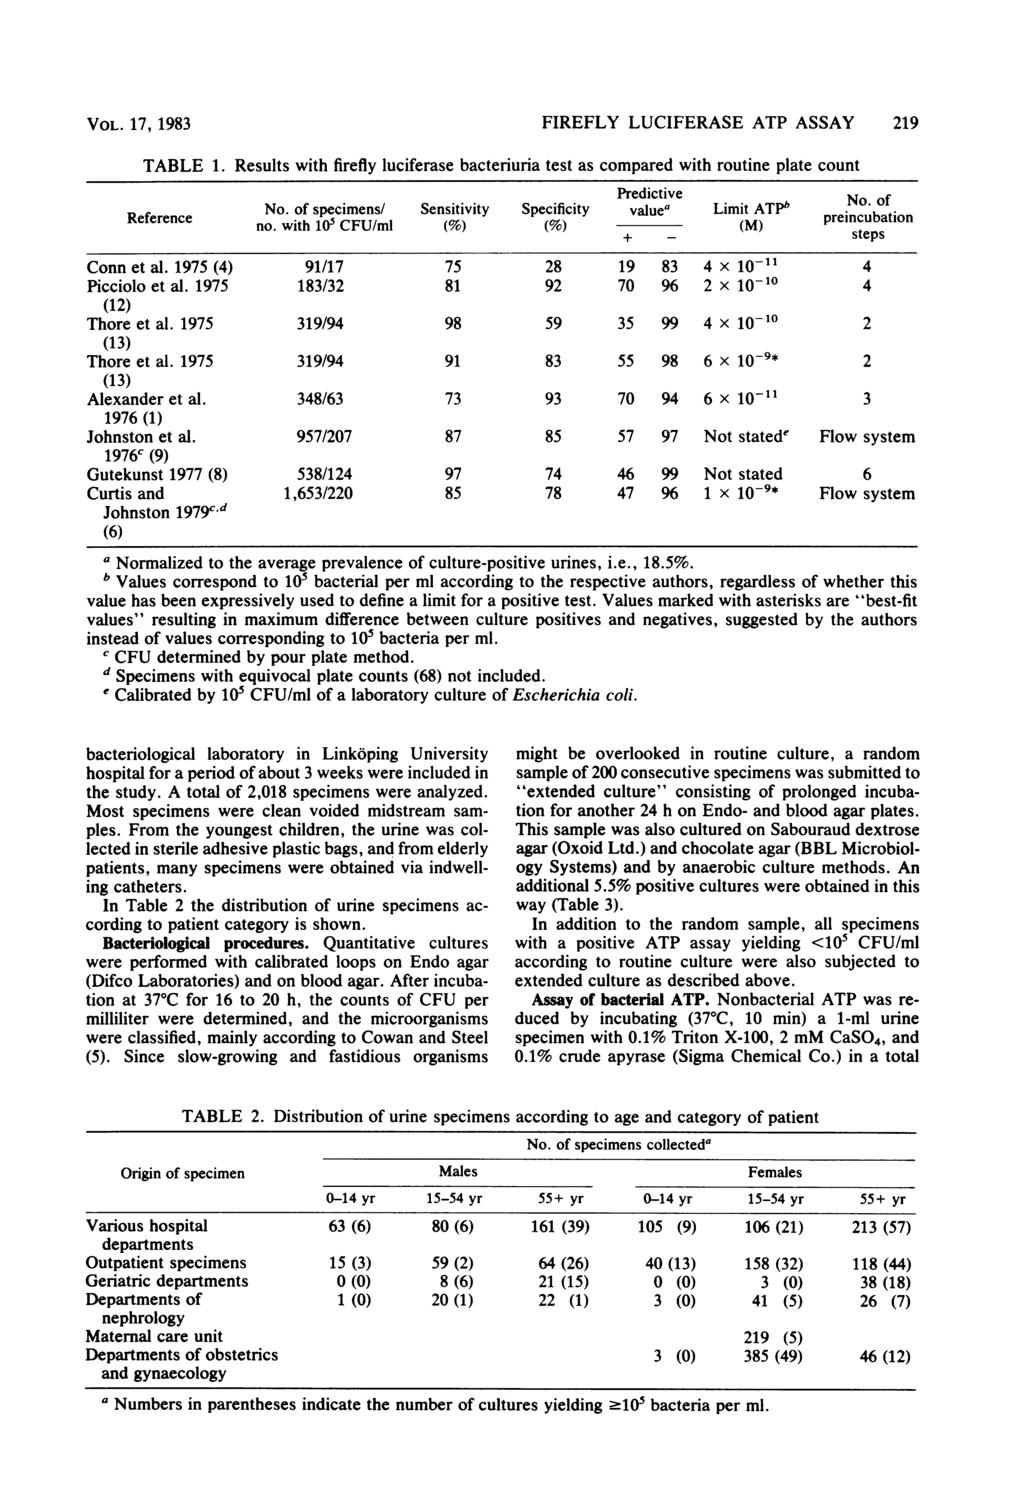 VOL. 17, 1983 FIREFLY LUCIFERASE ATP ASSAY 219 TABLE 1. Results with firefly luciferase bacteriuria test as compared with routine plate count Predictive No. of Reference No.